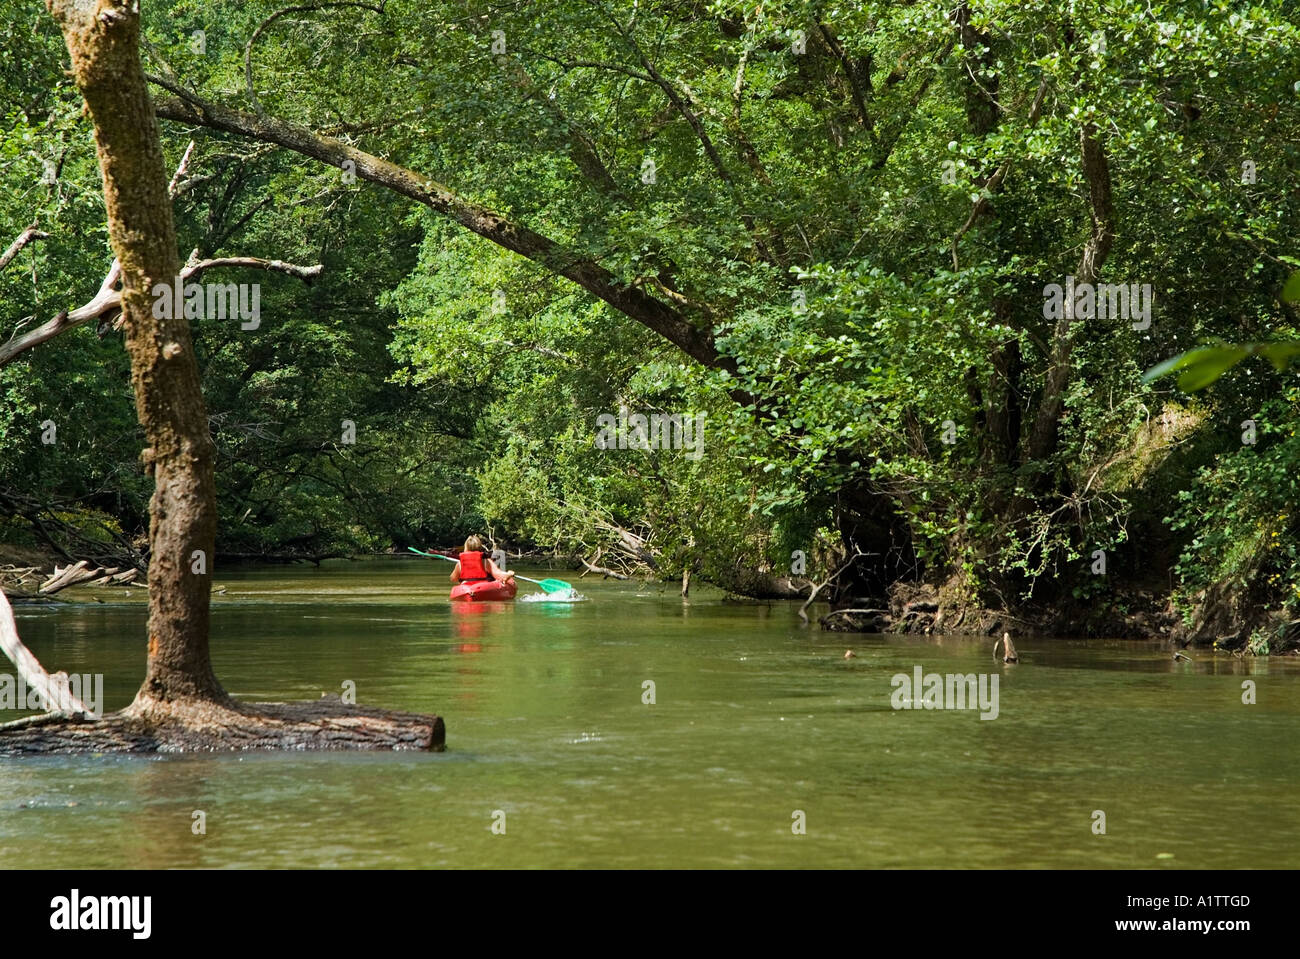 Rear view of a woman canoeing on the Eyre river, Aquitaine, France. Stock Photo